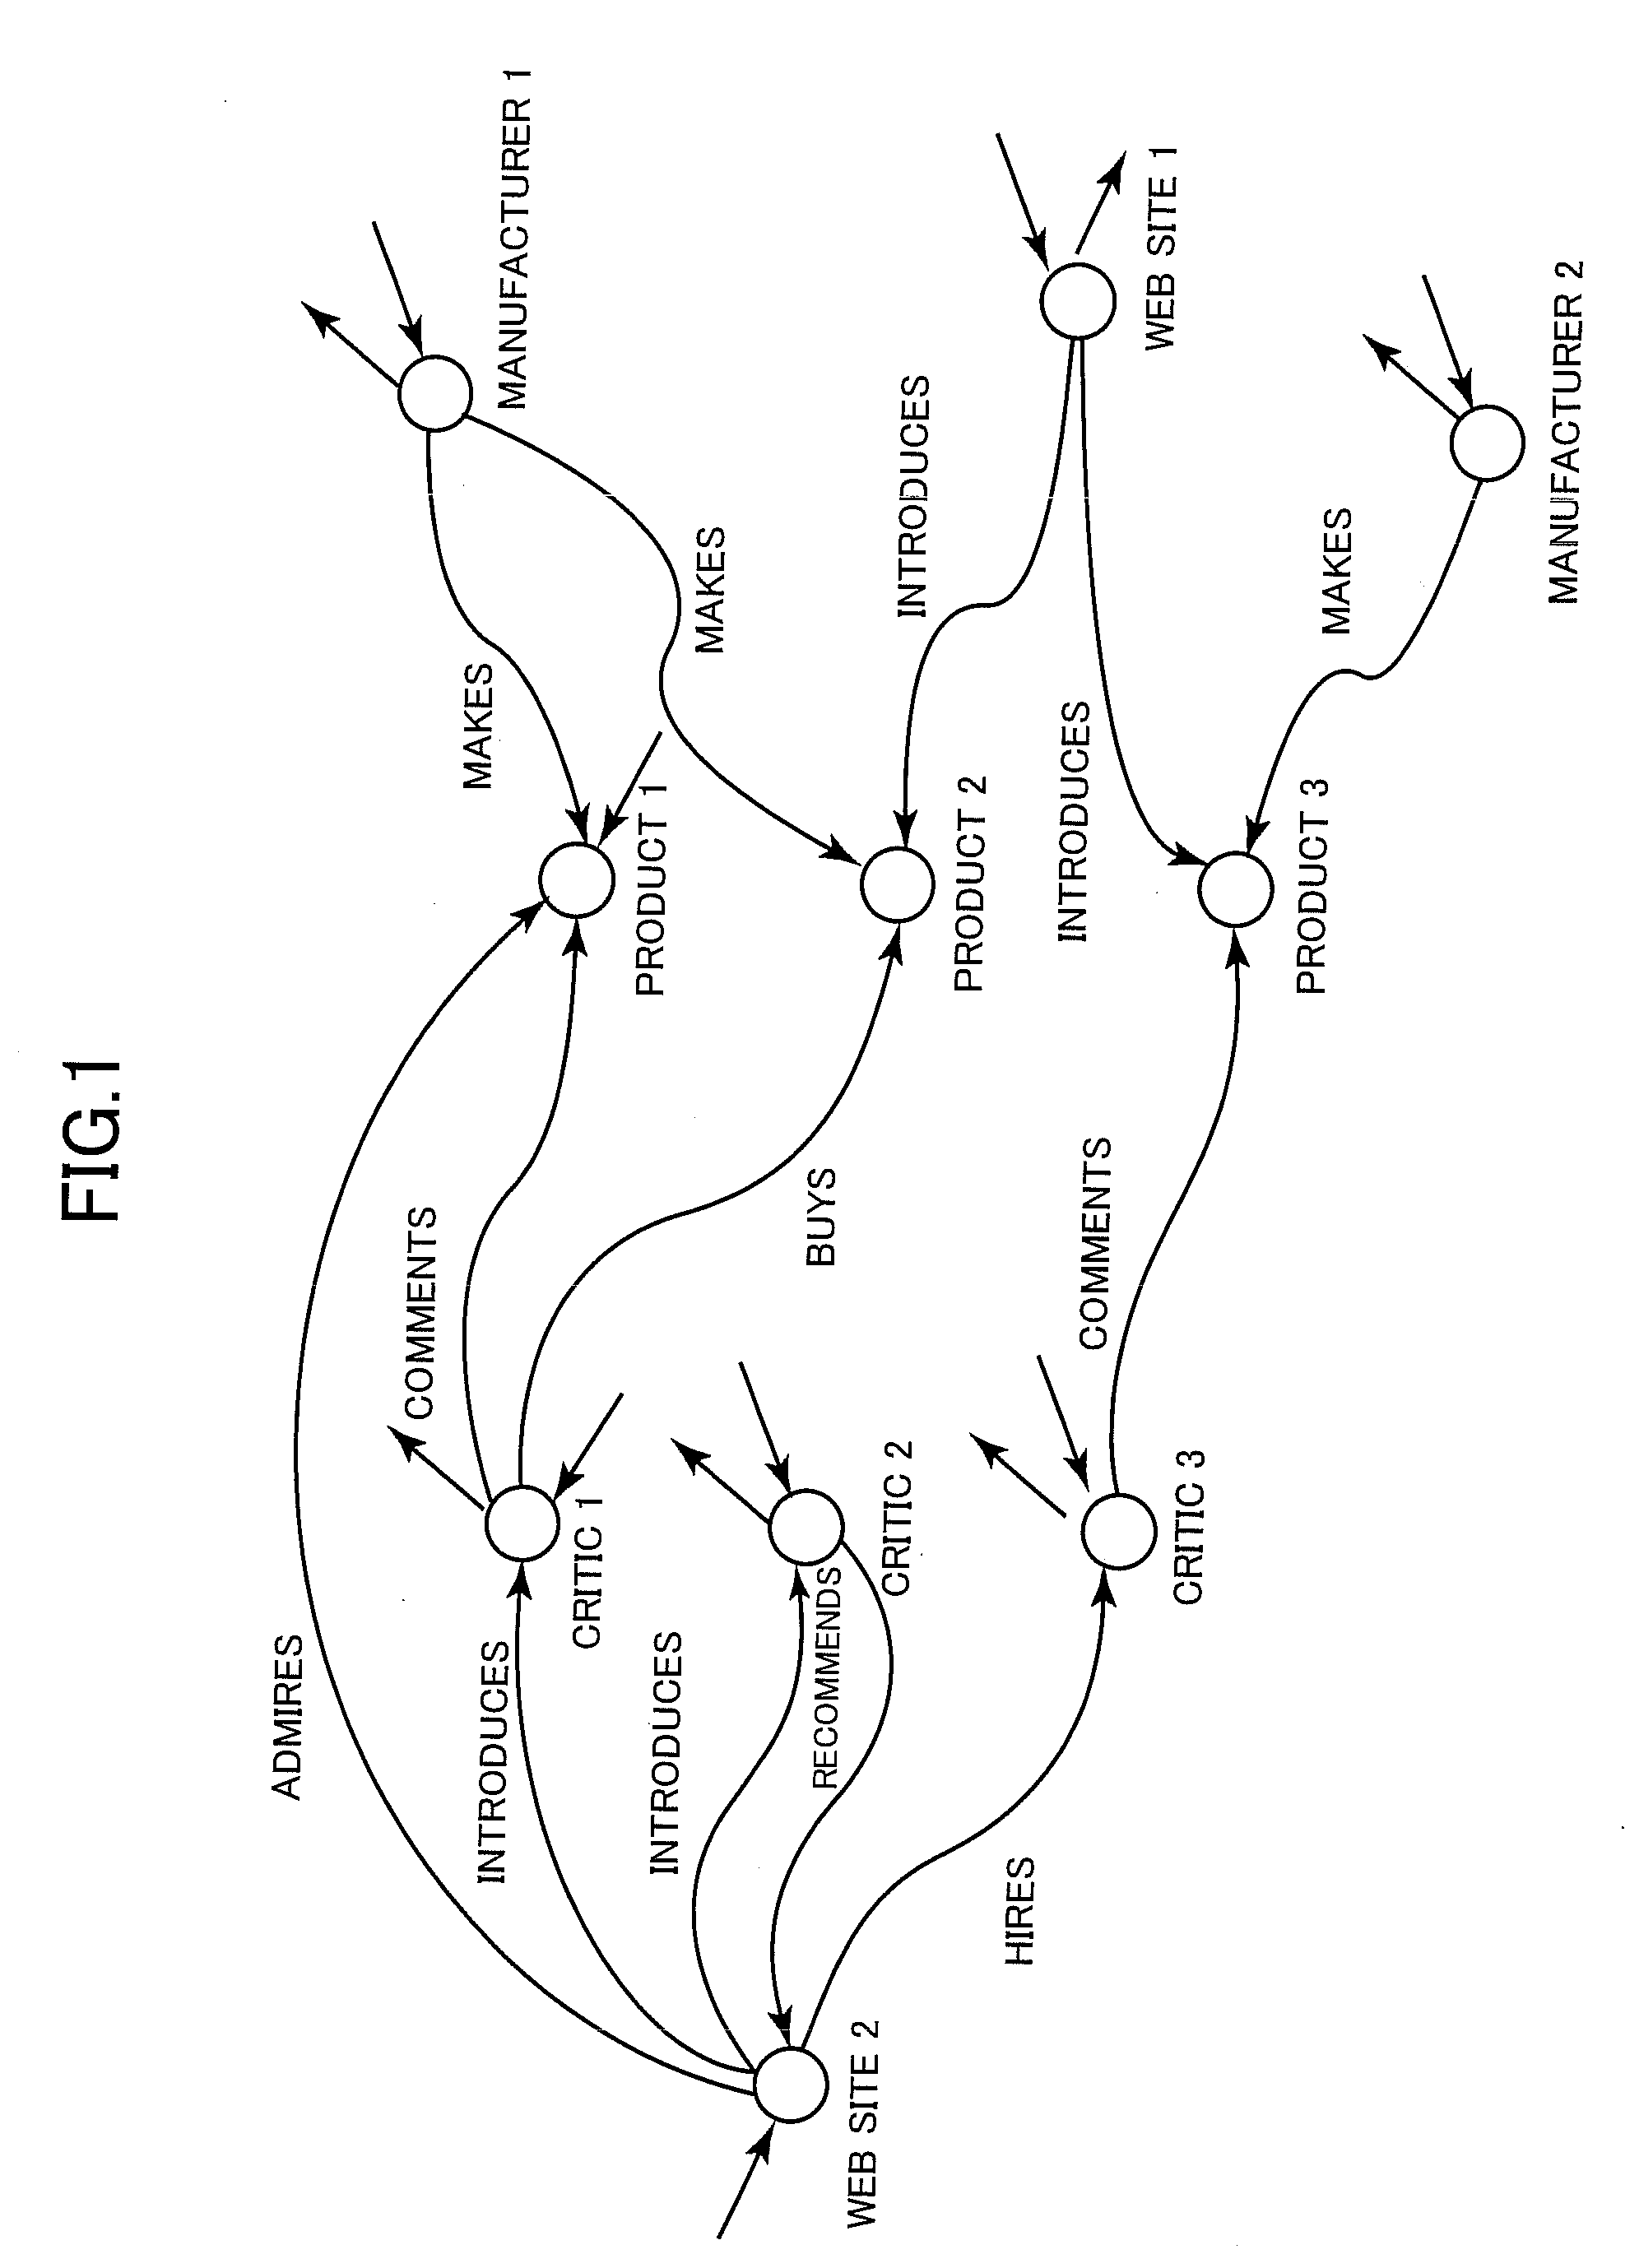 Access control device and method thereof